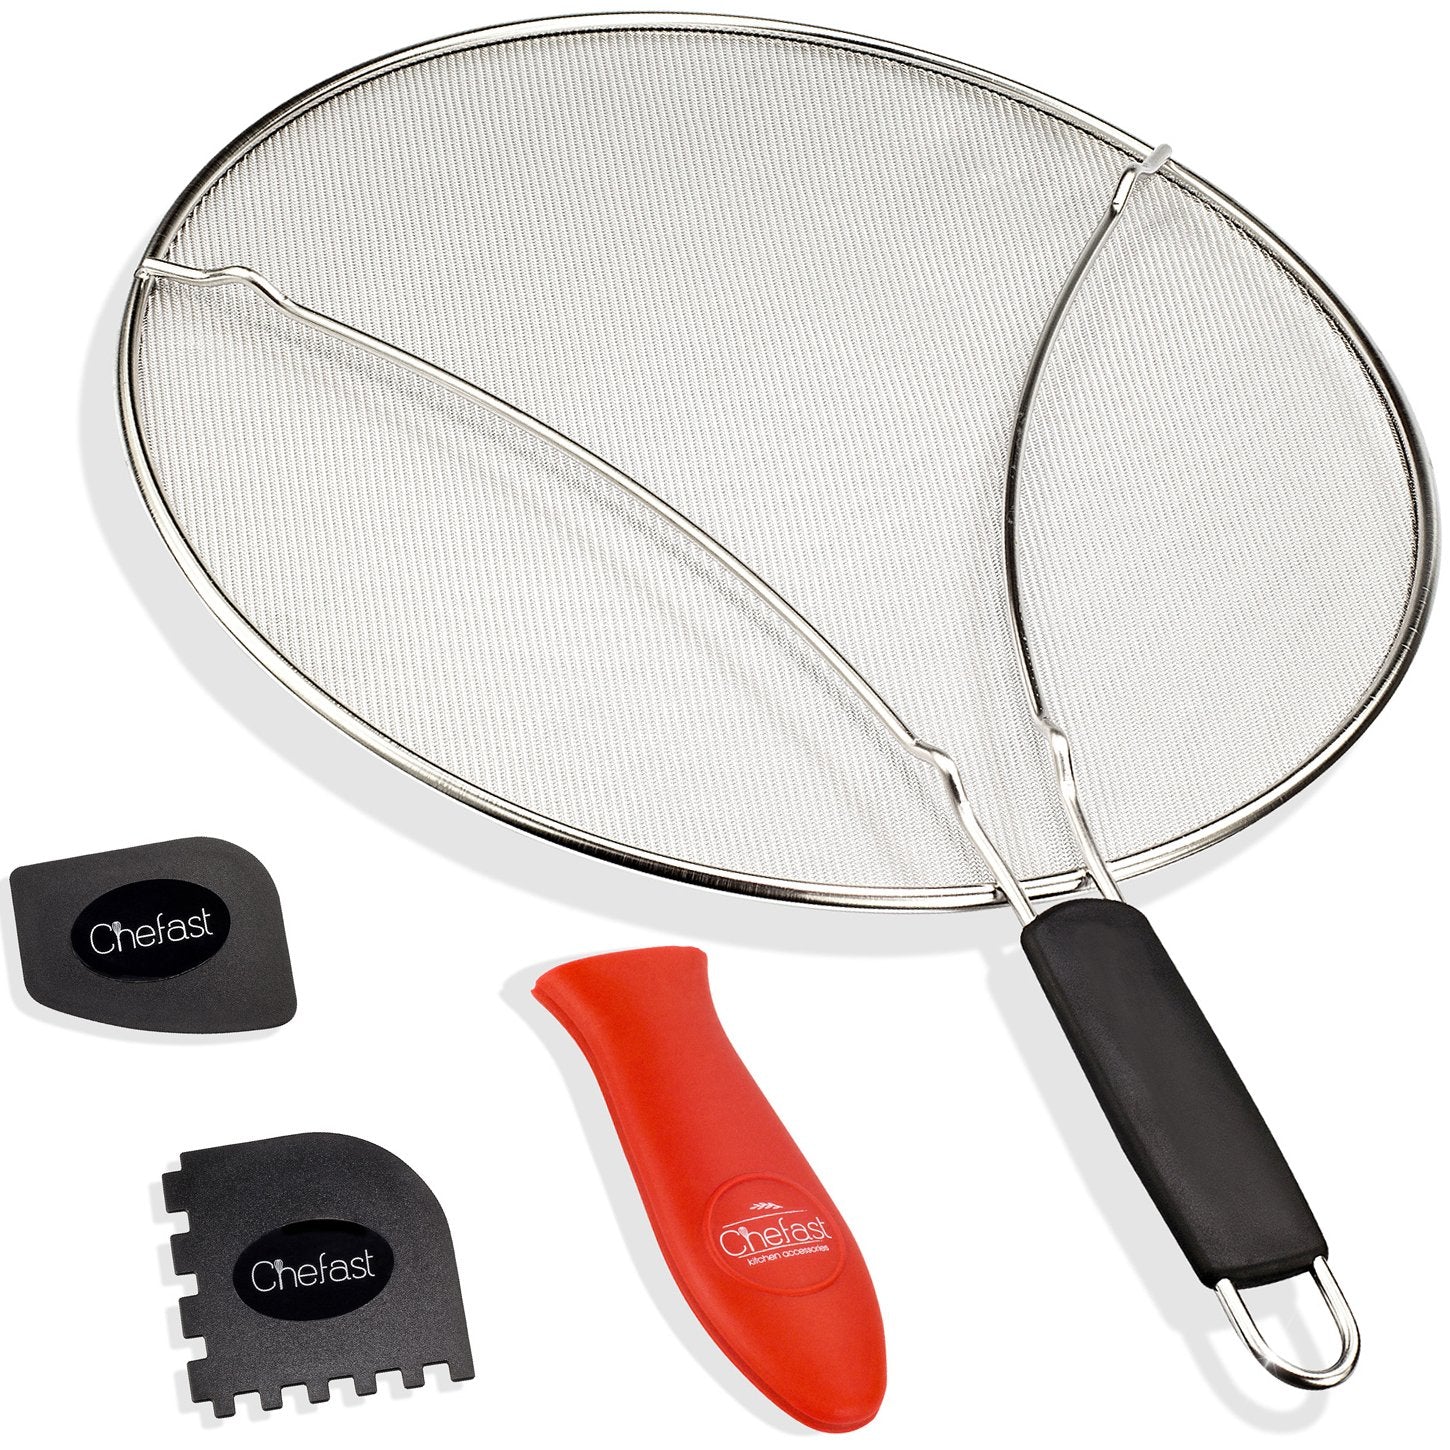 Chefast Splatter Screen Set: 13-Inch Stainless Steel Grease Guard, Grill and Cooking Pan Scrapers, and Silicone Hot Handle Holder - Oil Shield for Frying Pans and Skillets